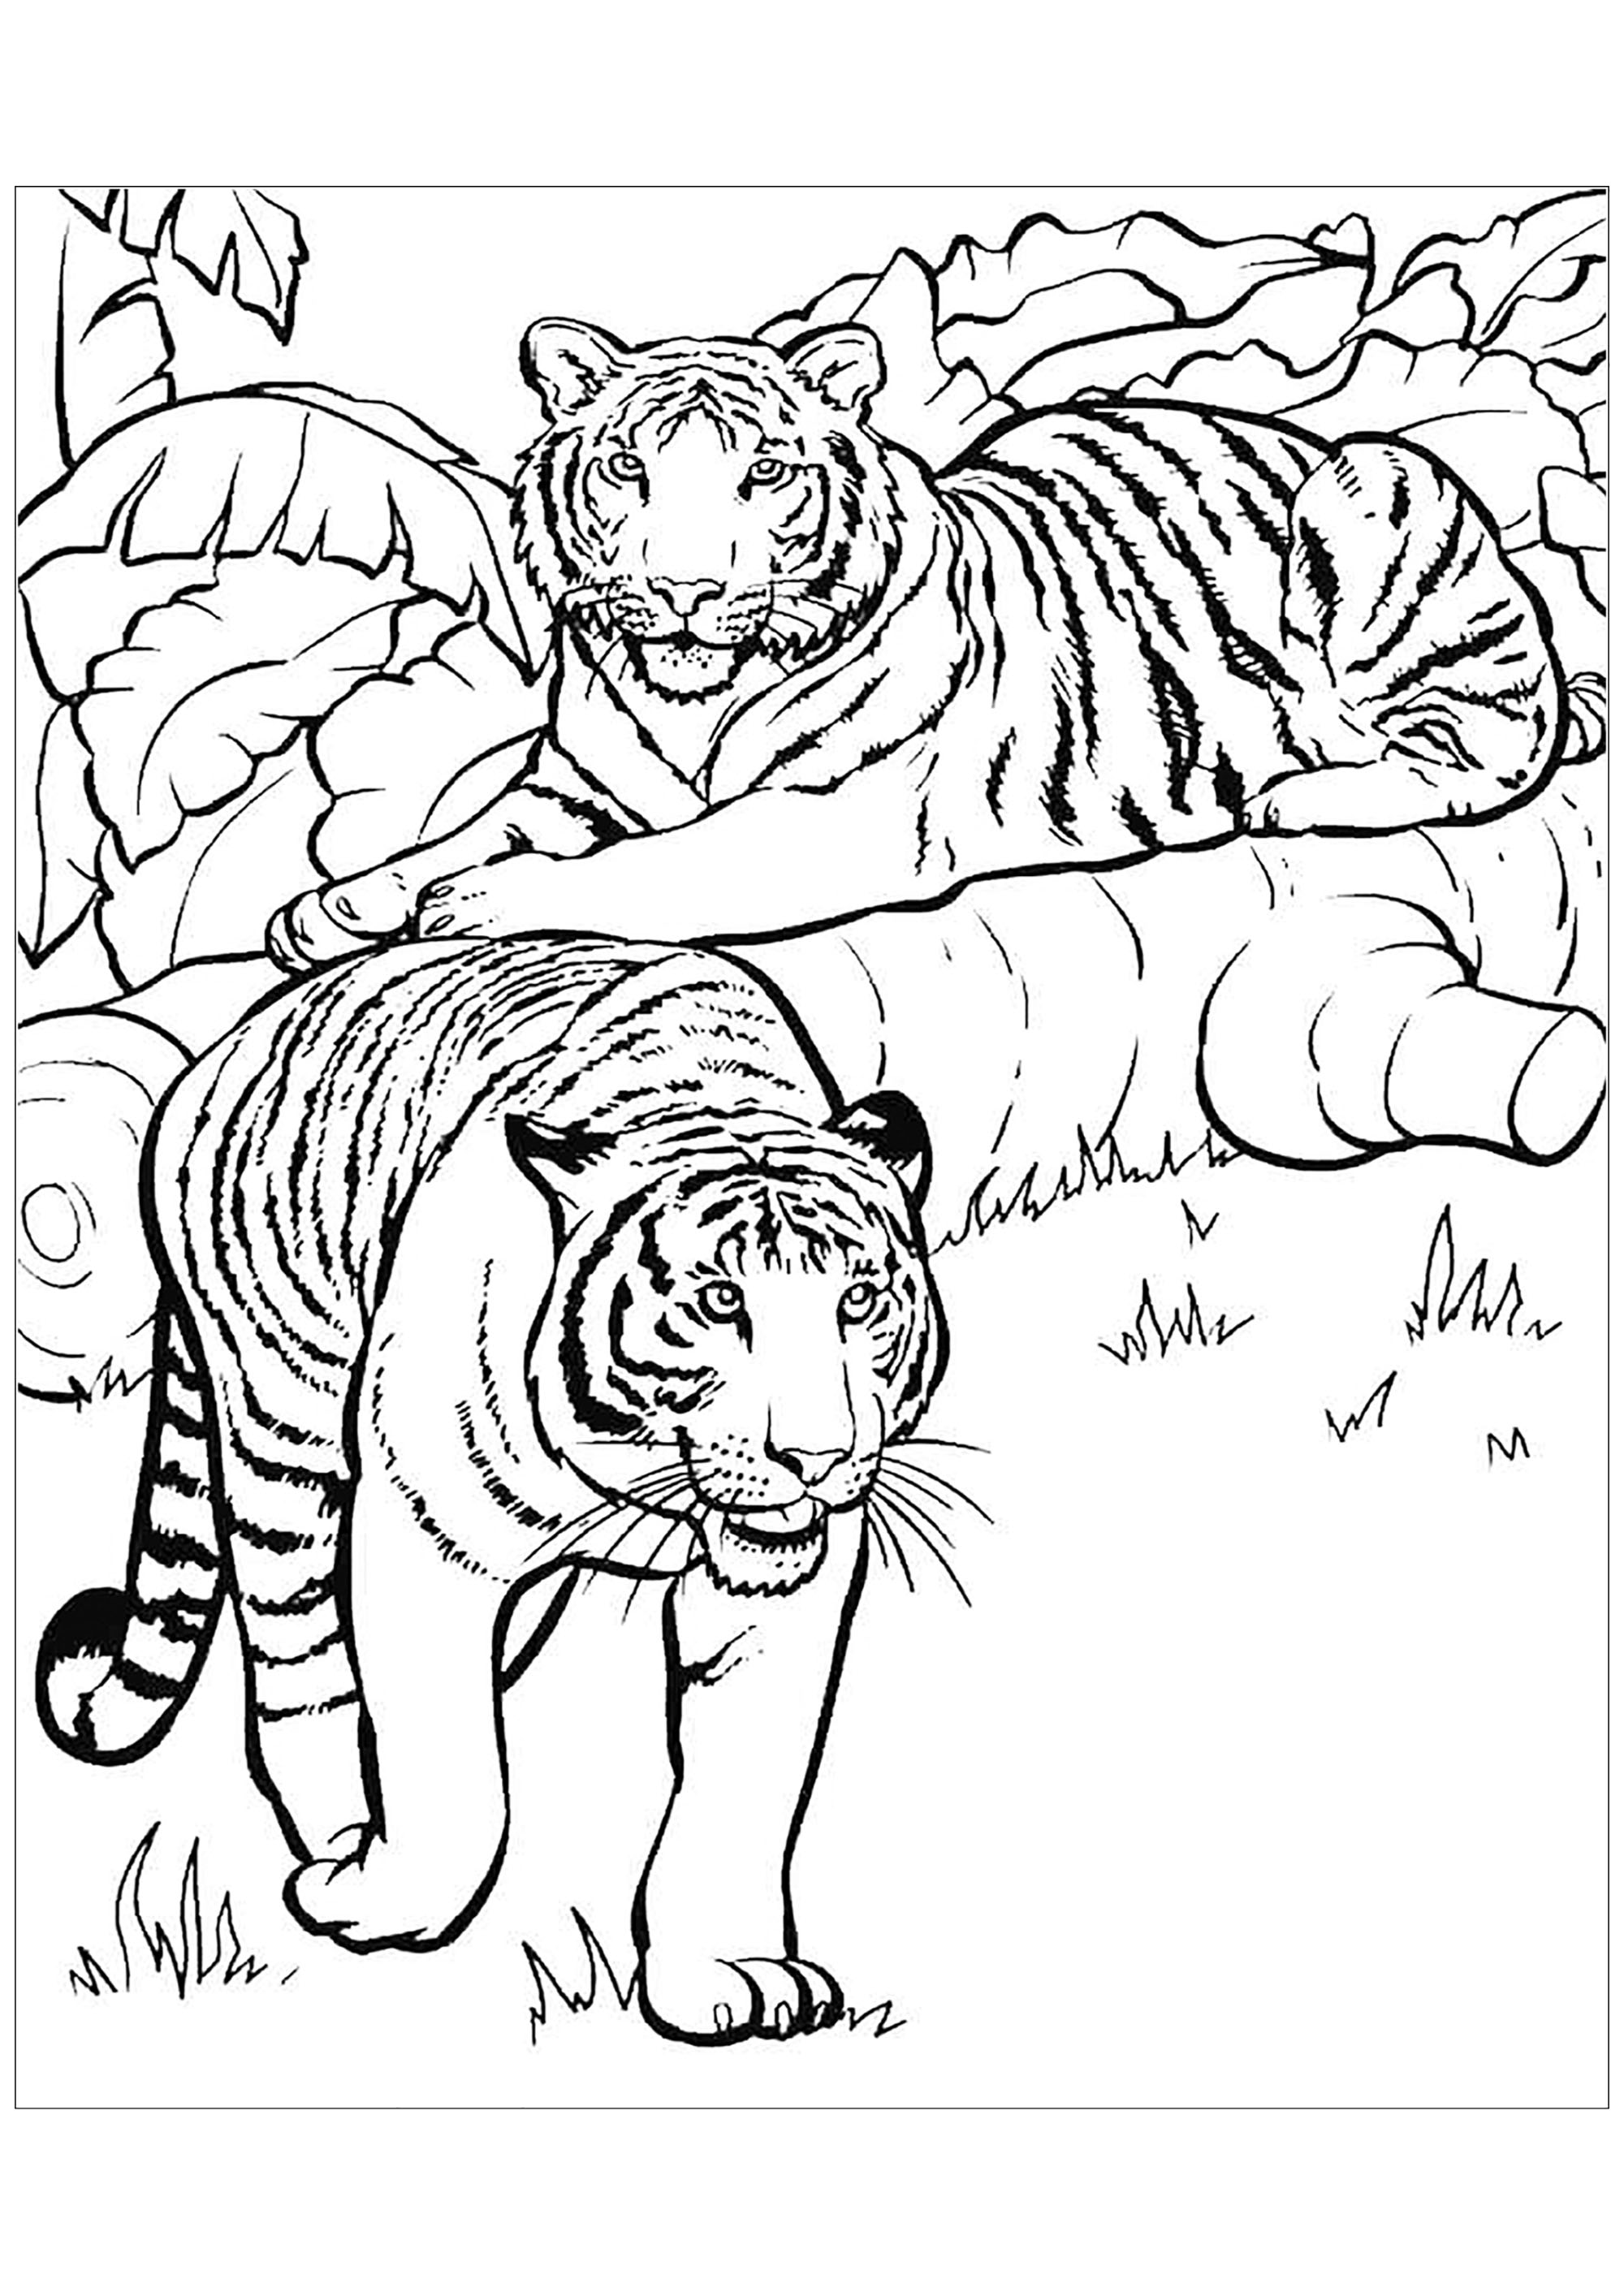 Free Tigers coloring page to print and color